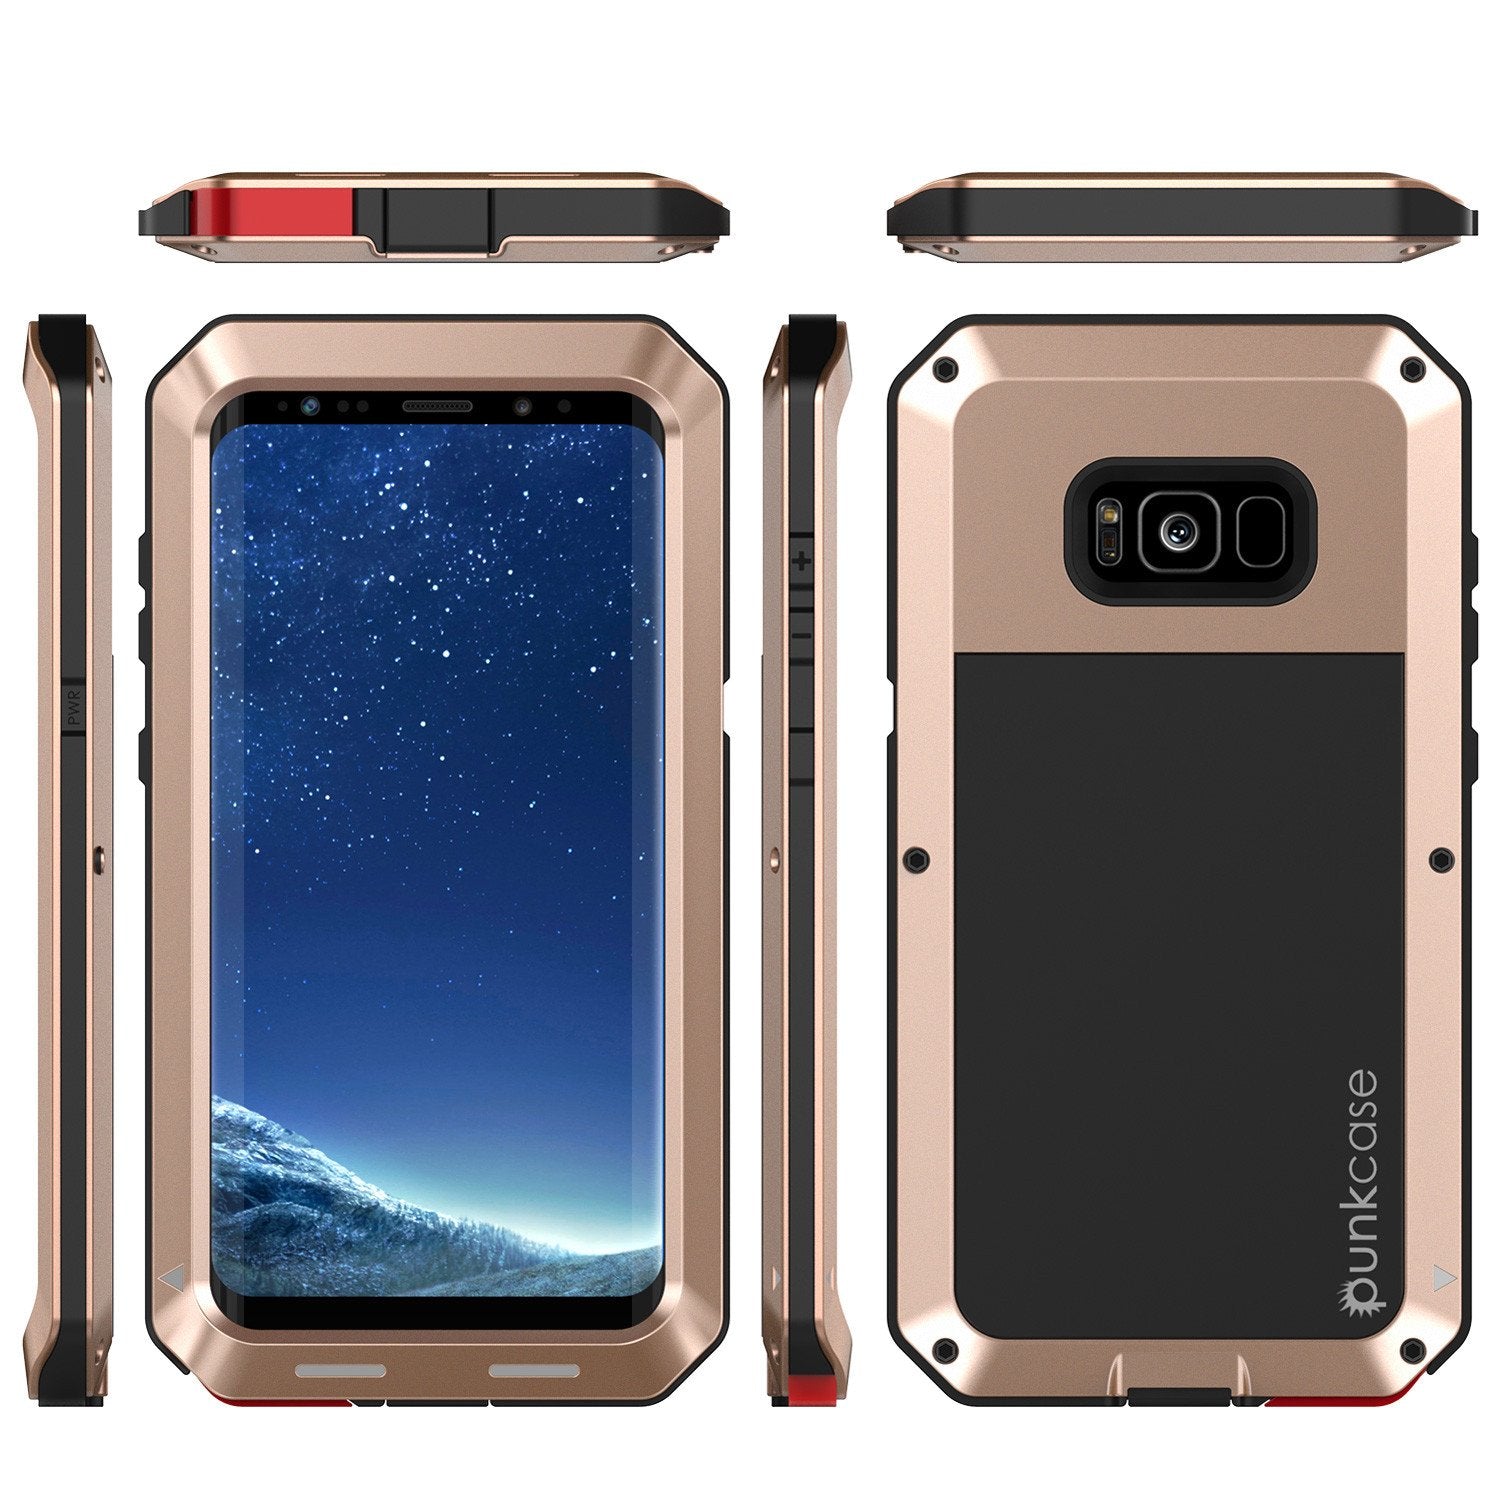 Galaxy S8 Metal Case, Heavy Duty Military Grade Rugged Armor Cover [shock proof] W/ Prime Drop Protection [GOLD]